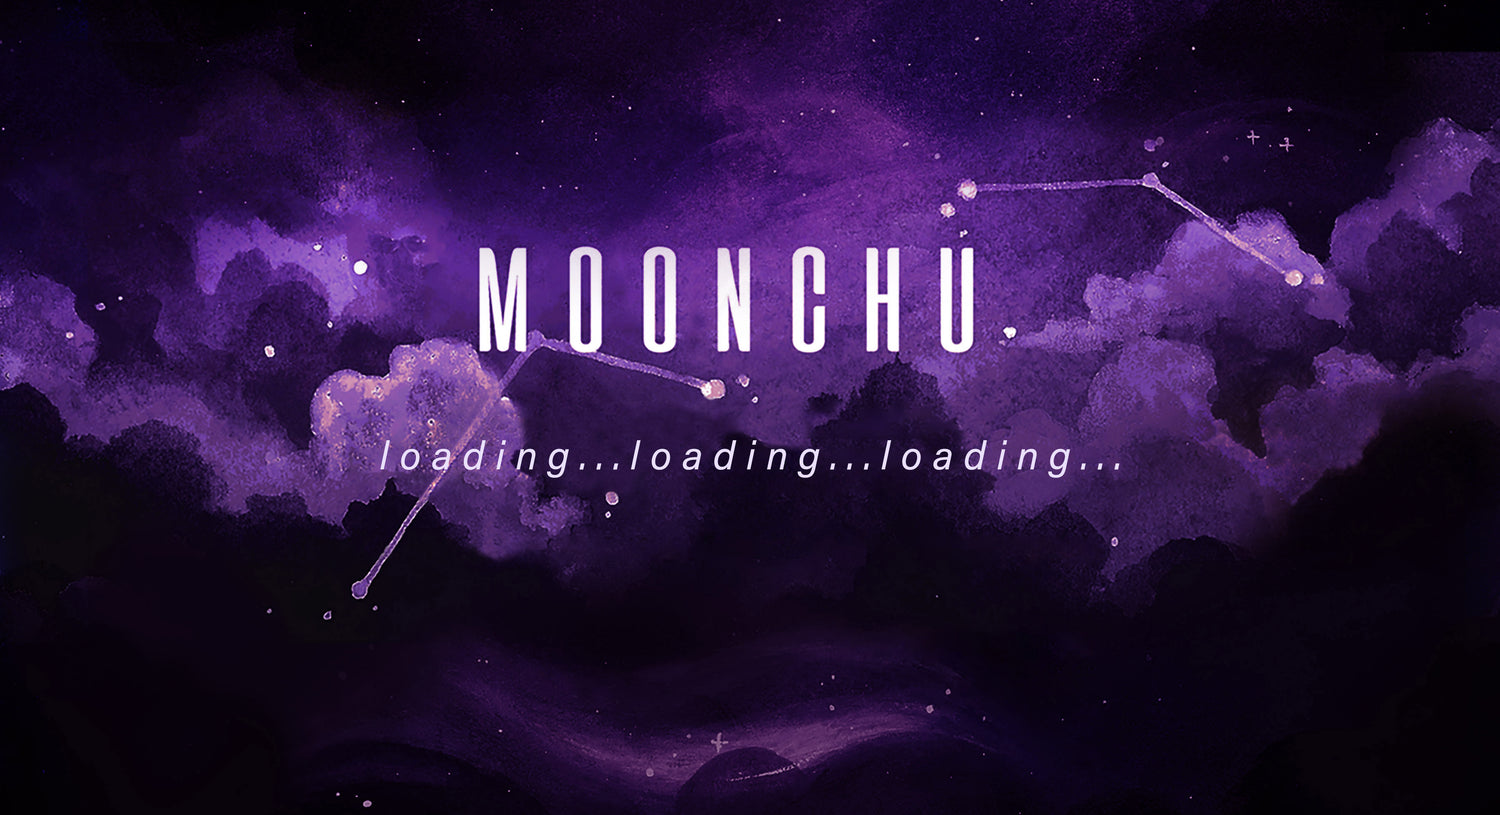 coming soon moonchu custom watercolour banner comprised of a rich purple gradient of clouds and constellations